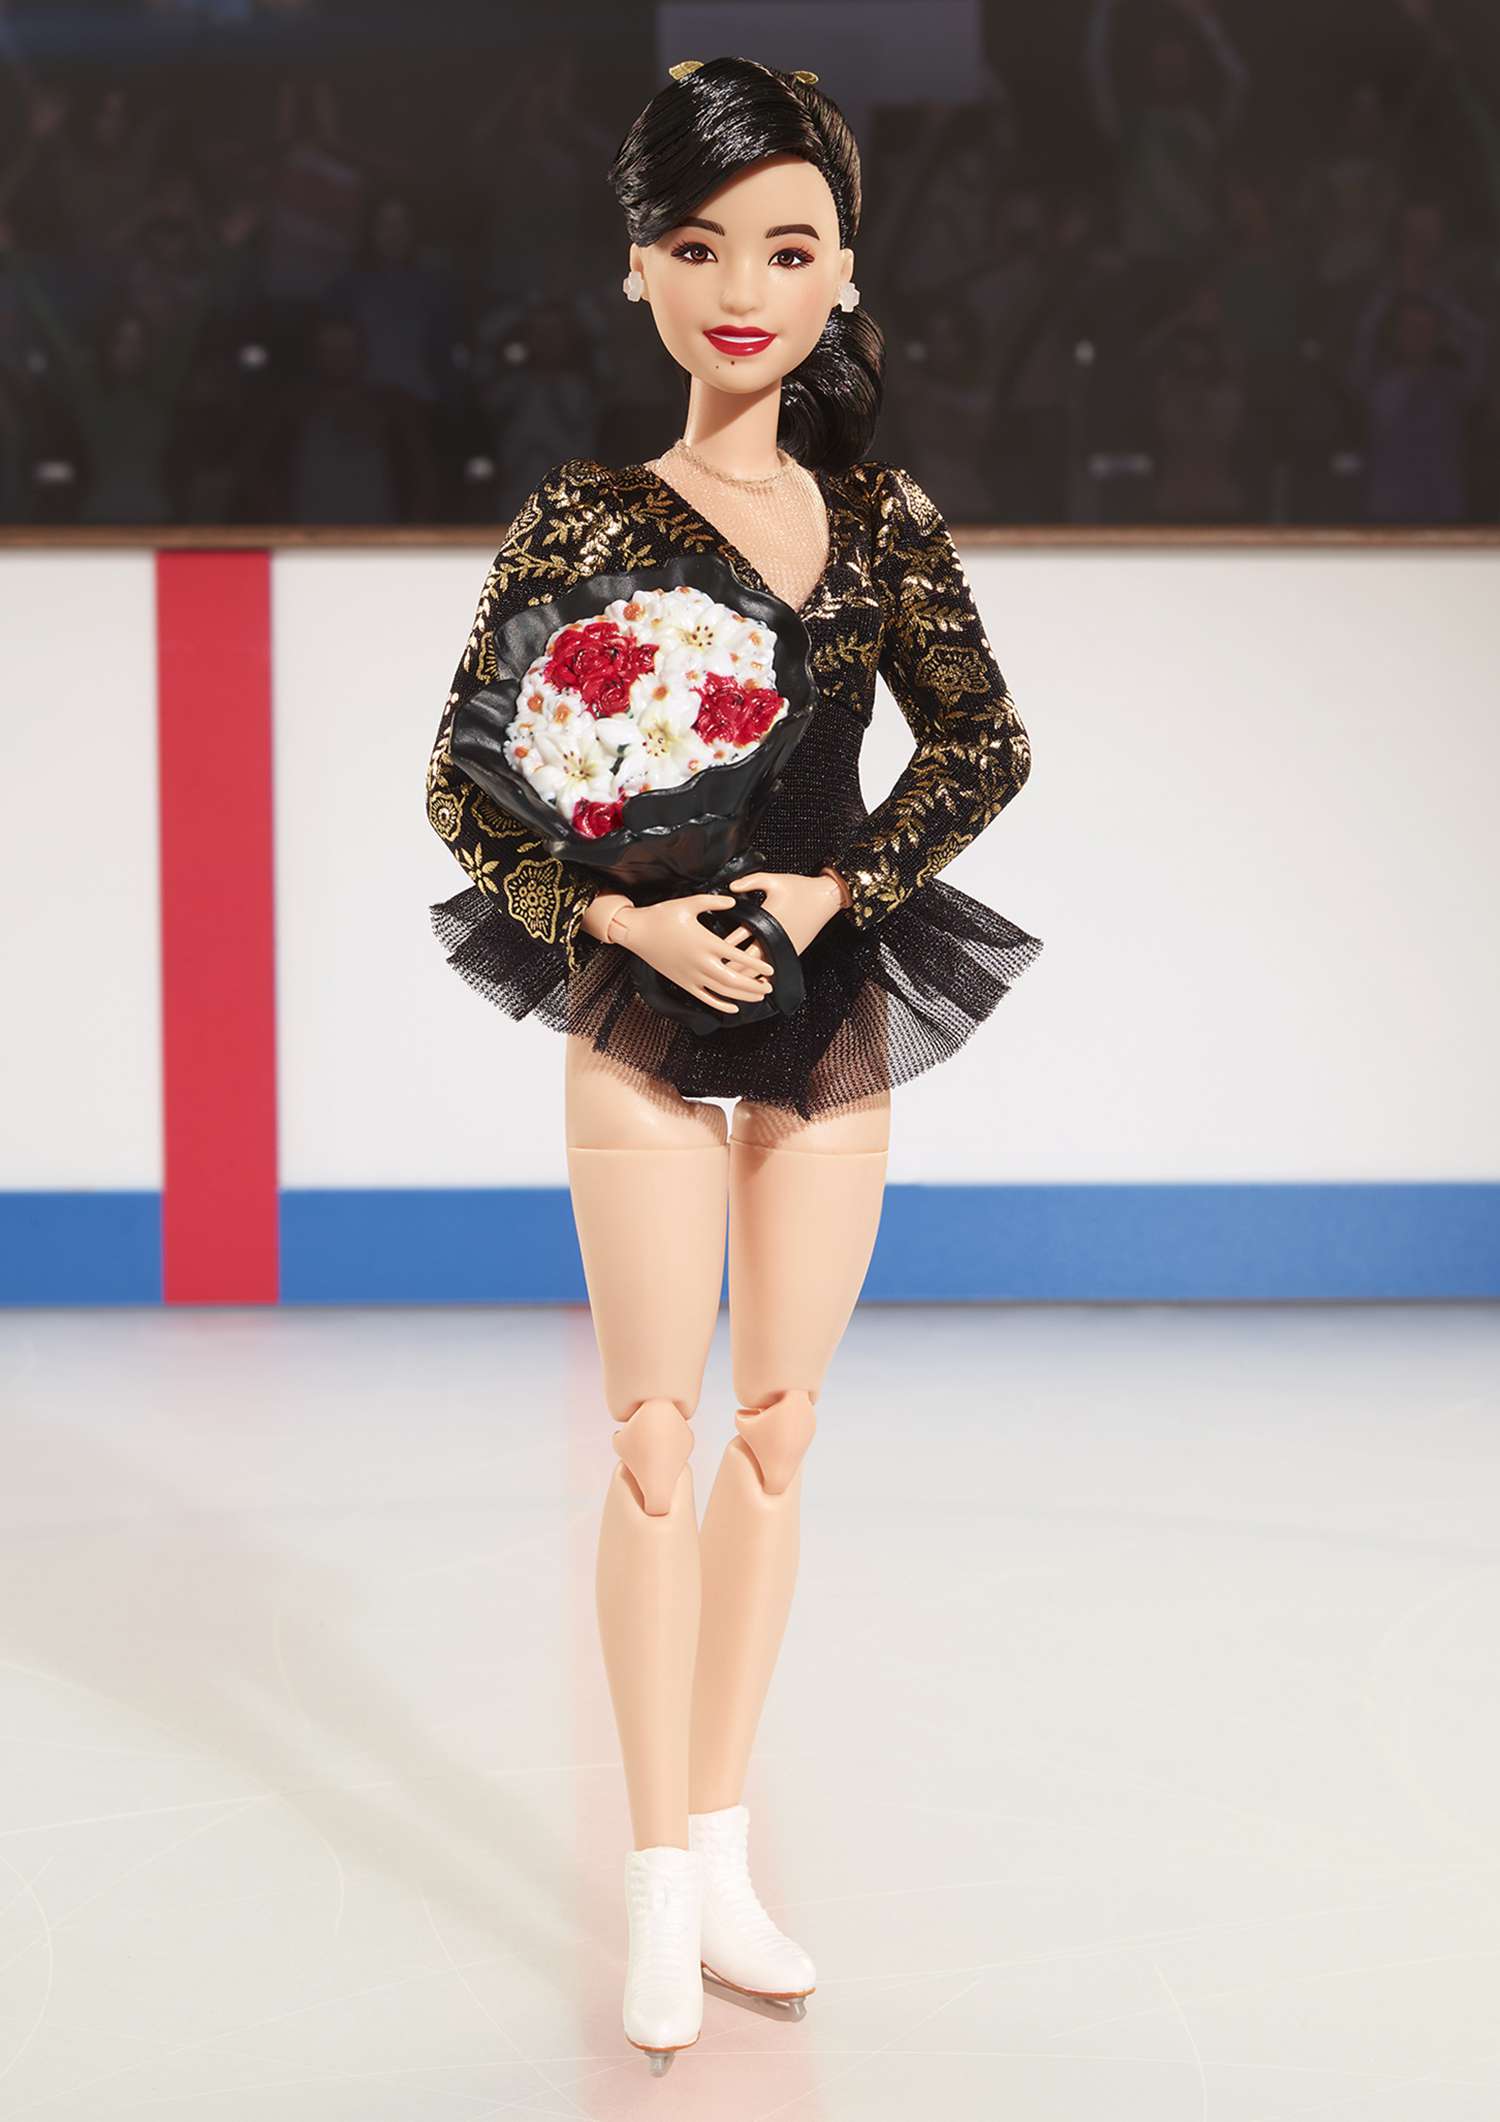 Kristi Yamaguchi Gets a Barbie in Her Likeness for AAPI Heritage Month 